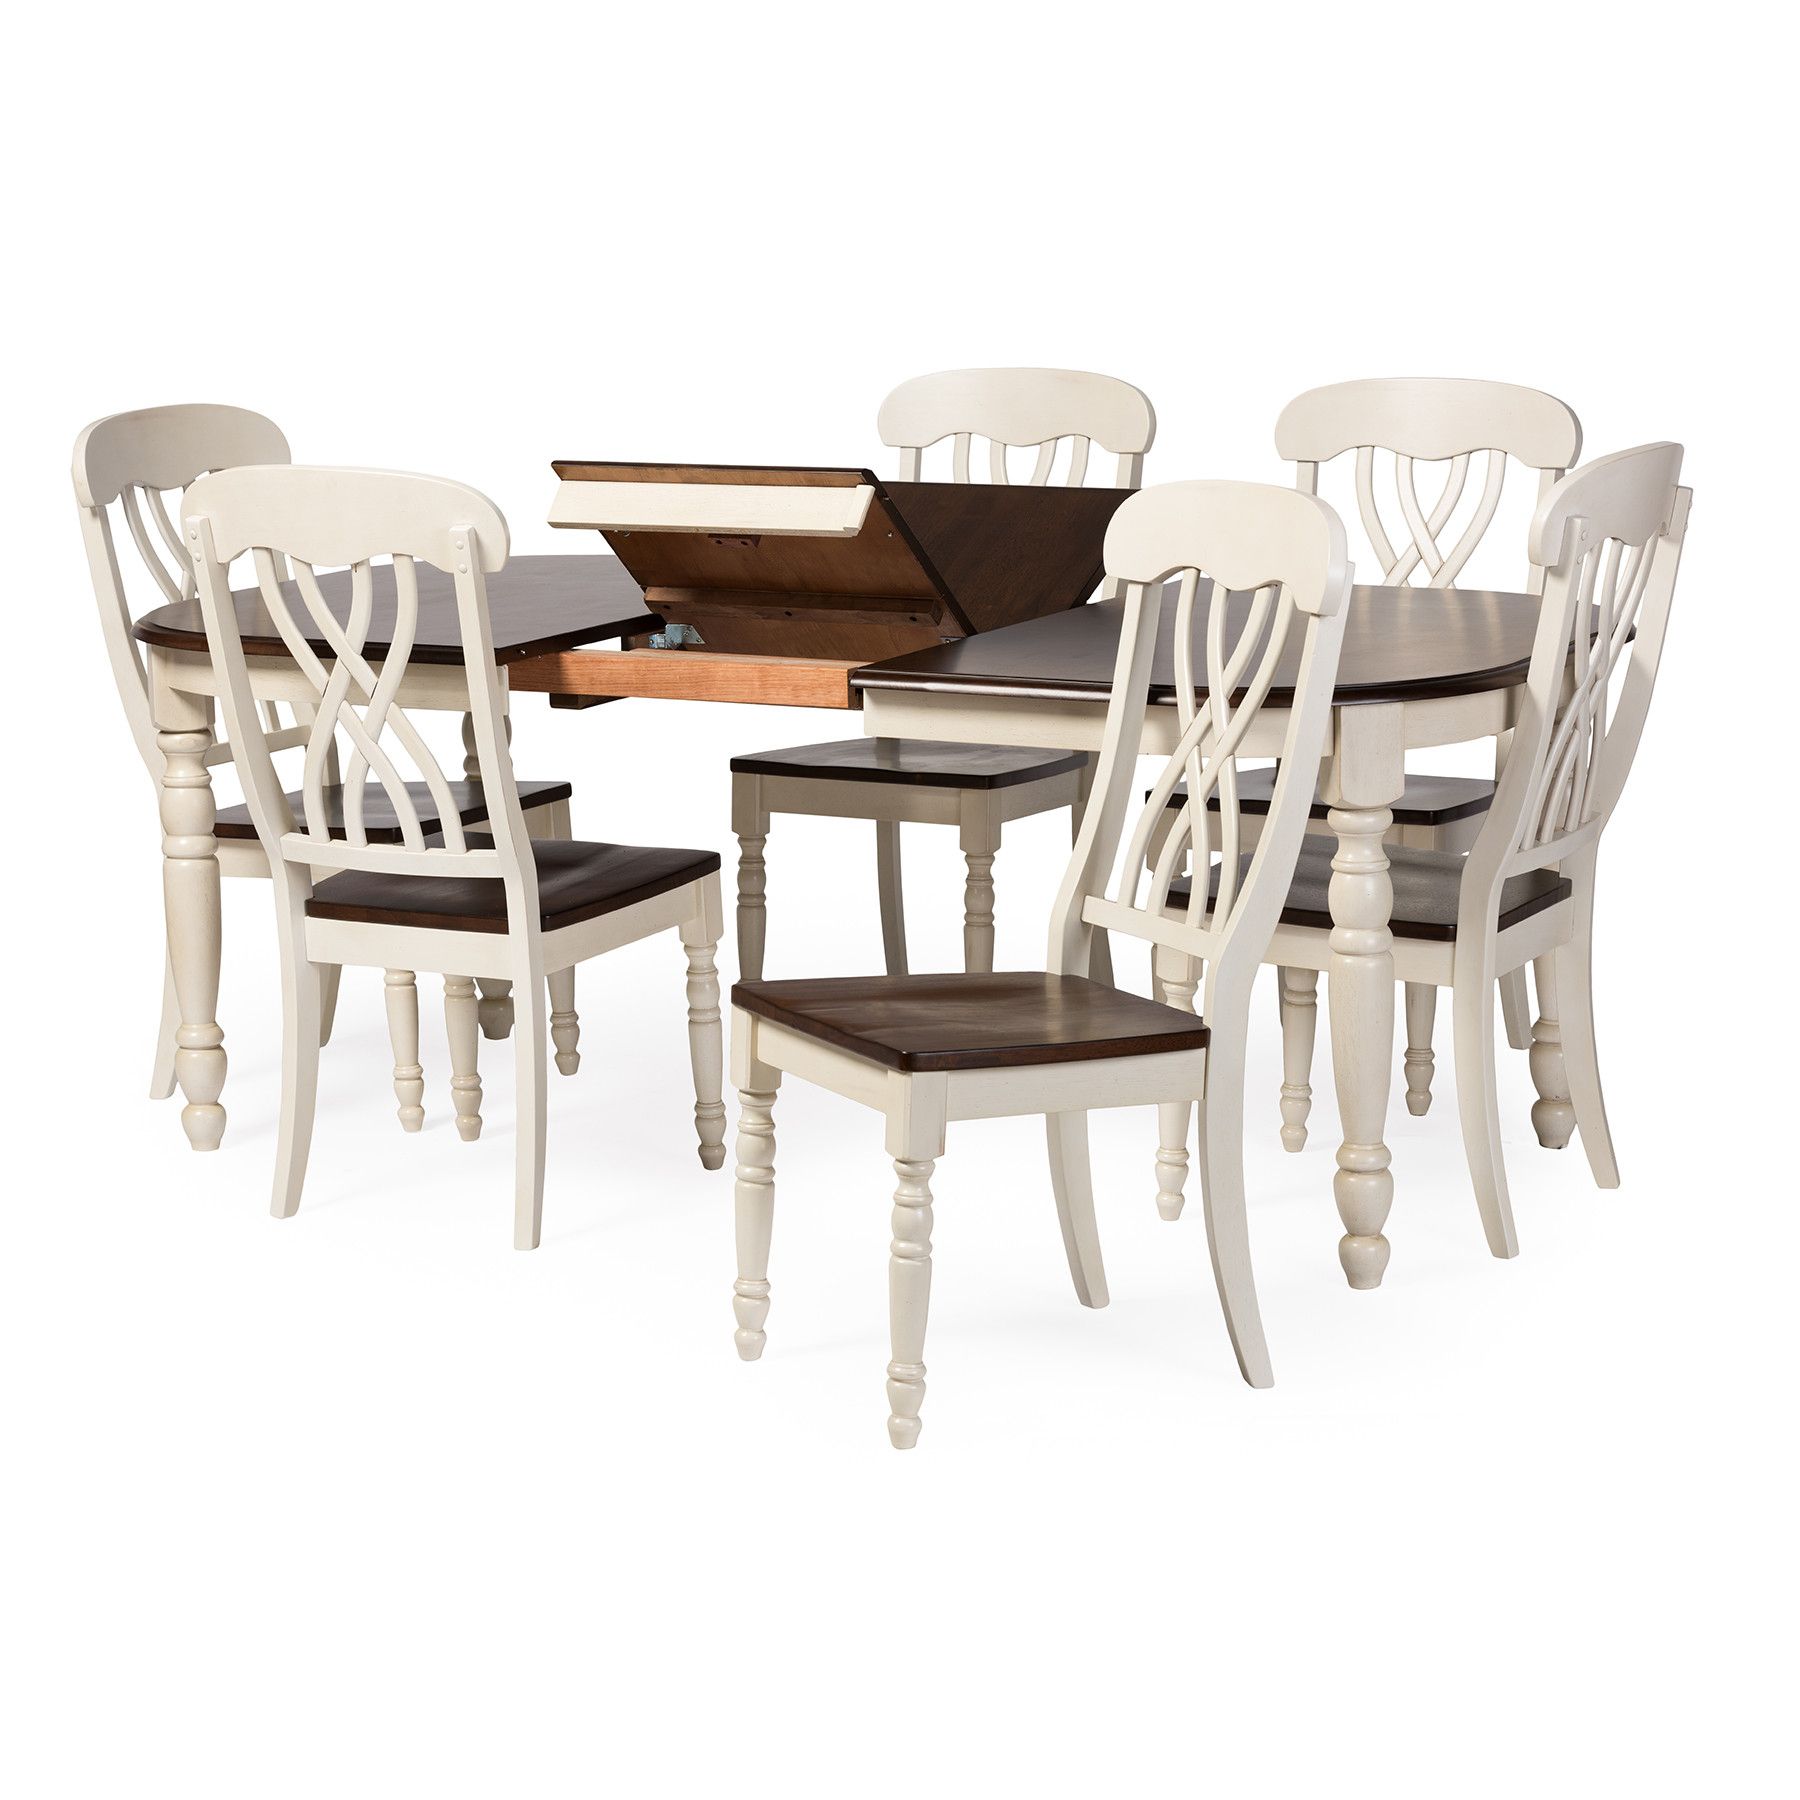 Wholesale Dining Sets. Room Pier One (View 14 of 20)